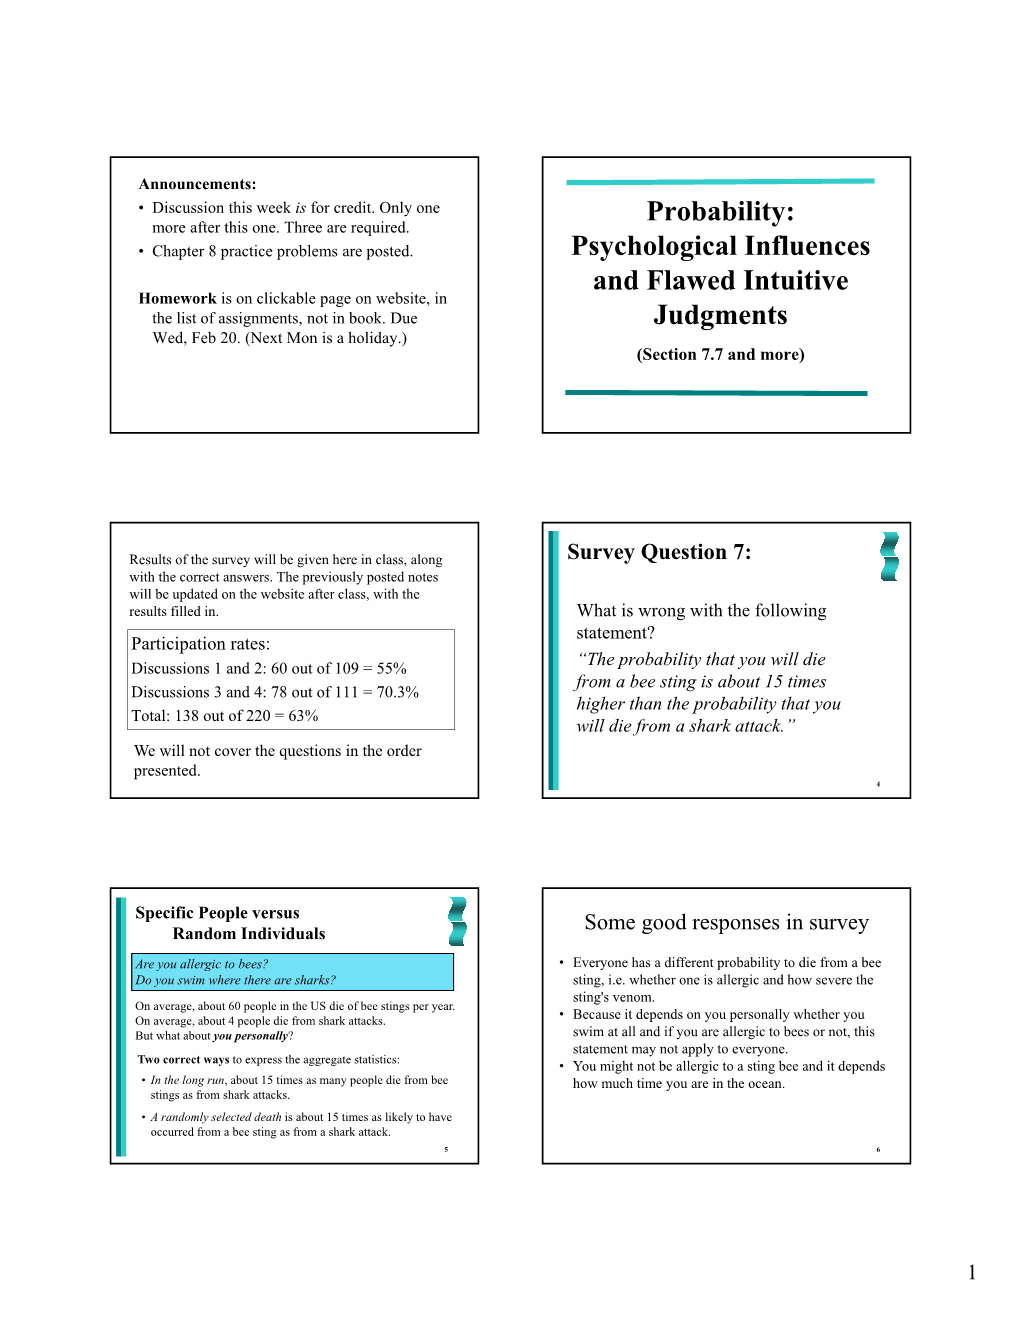 Probability: Psychological Influences and Flawed Intuitive Judgments